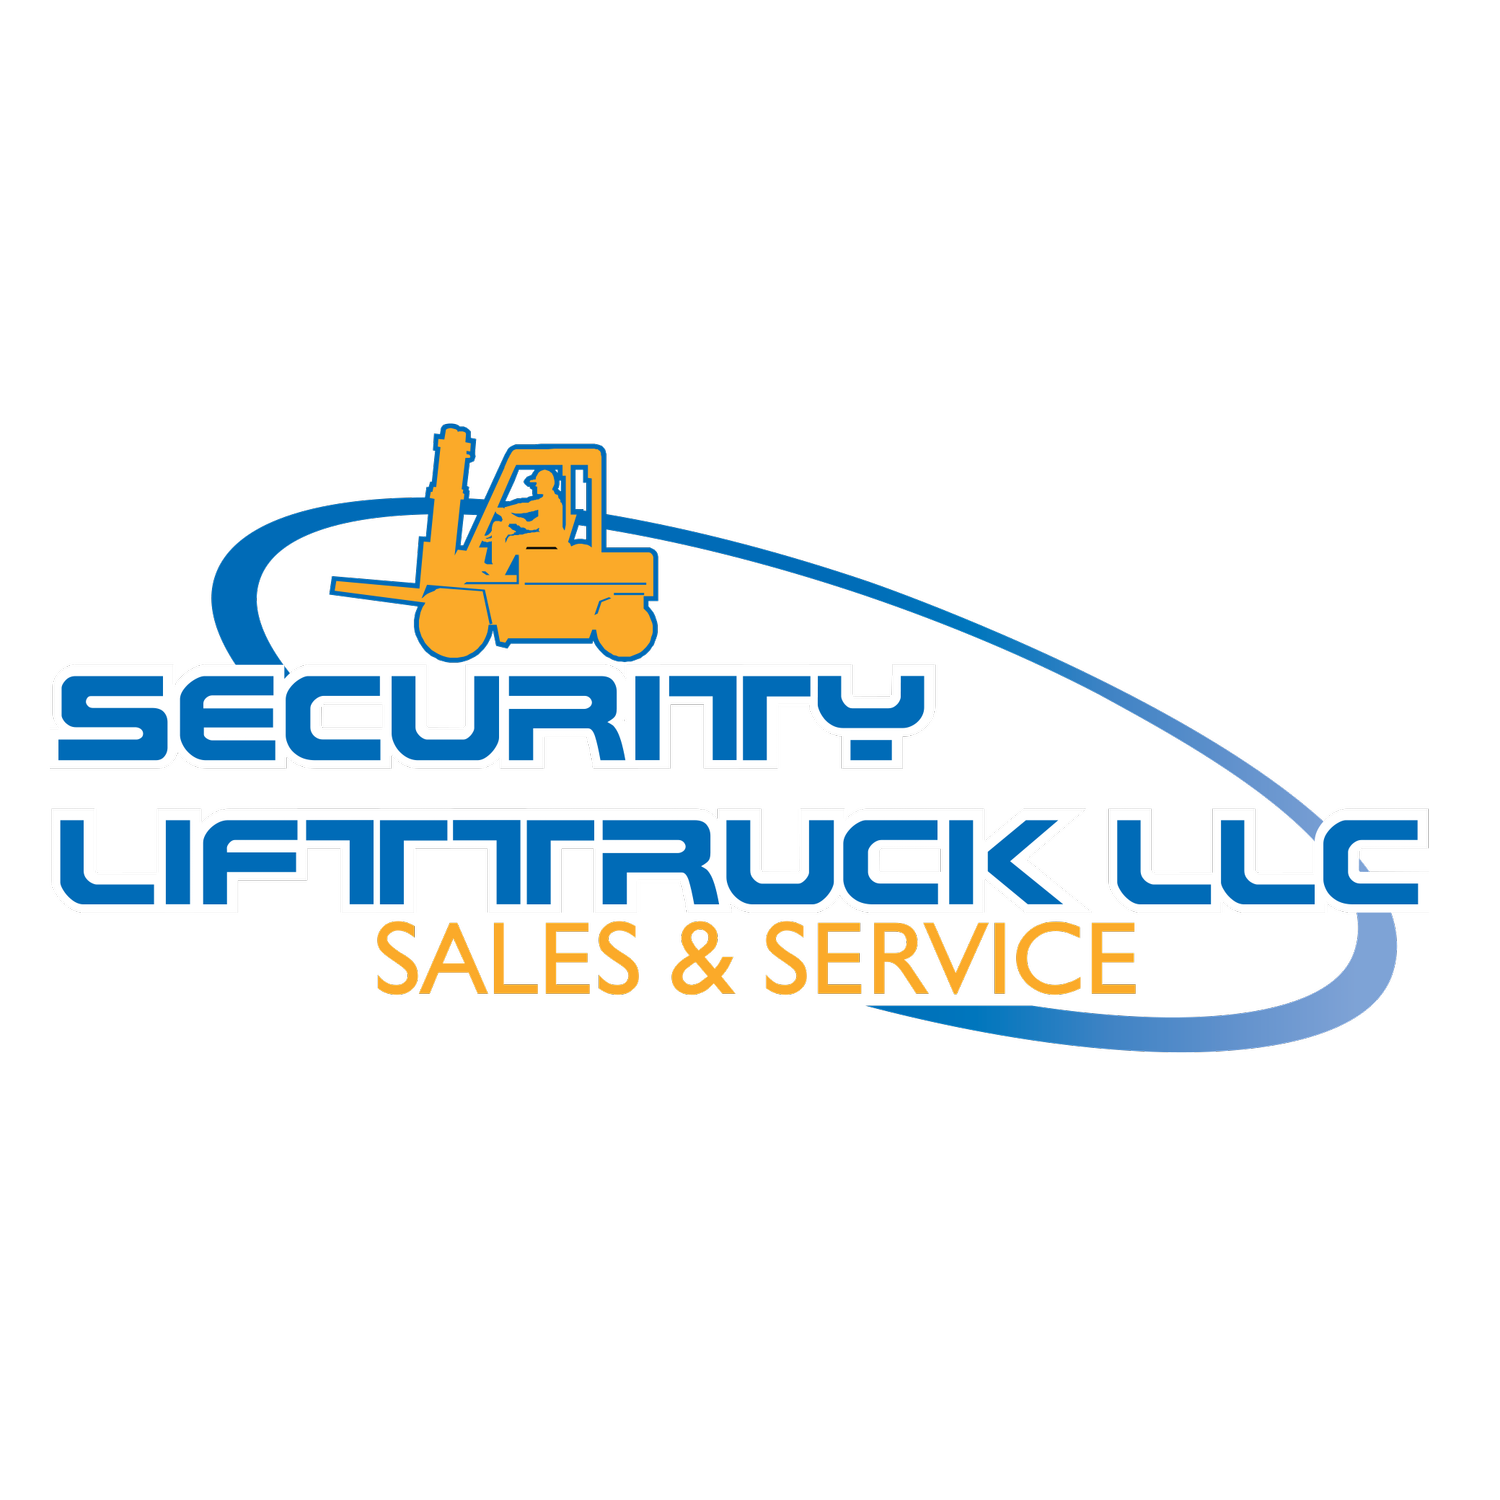 Security Lift Truck Sales and Service